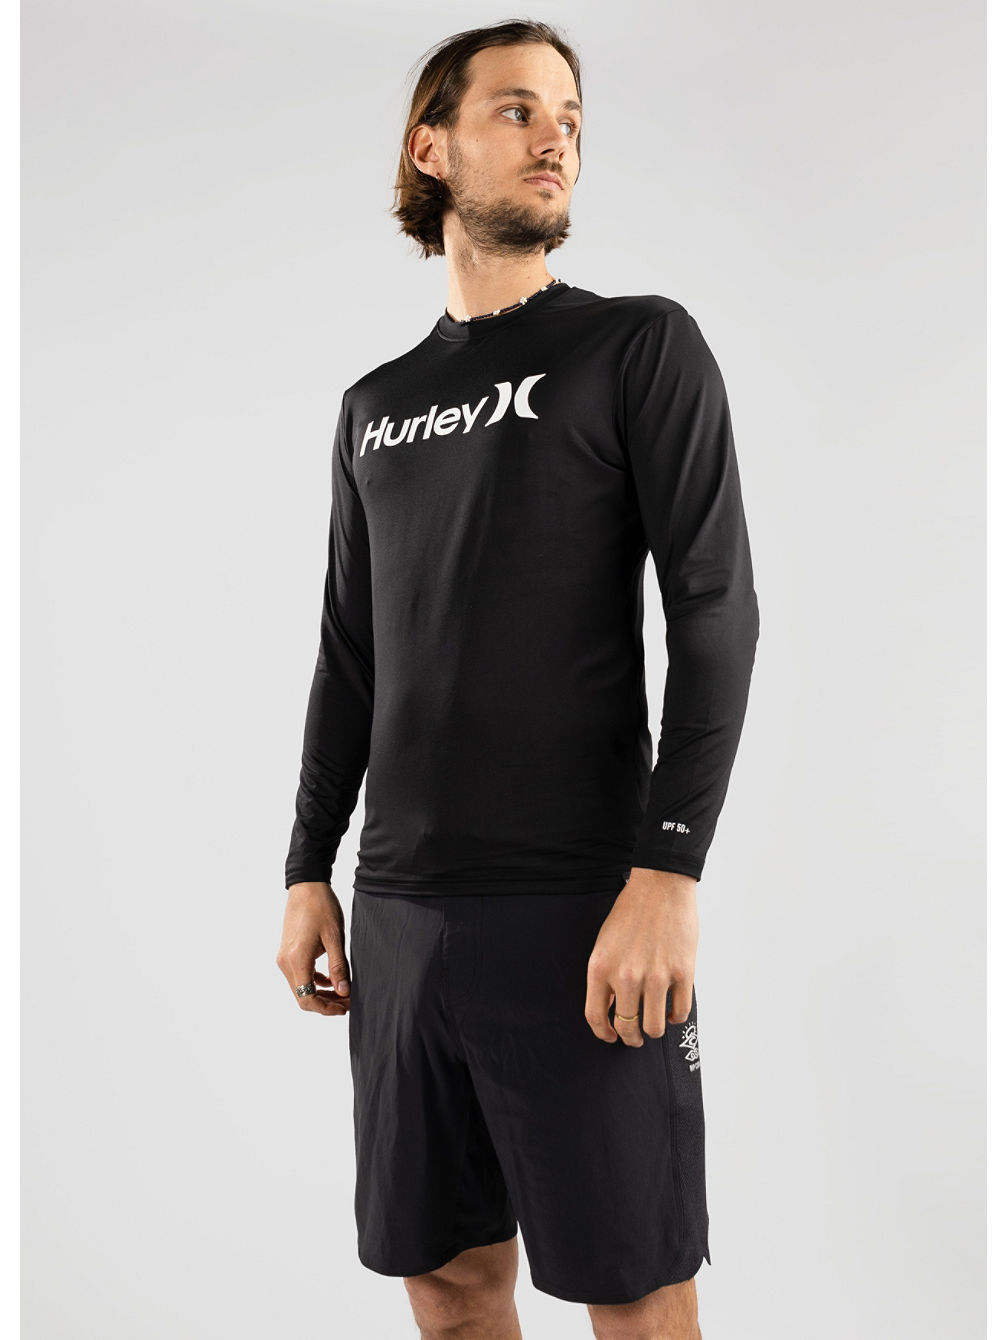 One &amp;amp; Only Quickdry Longsleeve Rash Guard